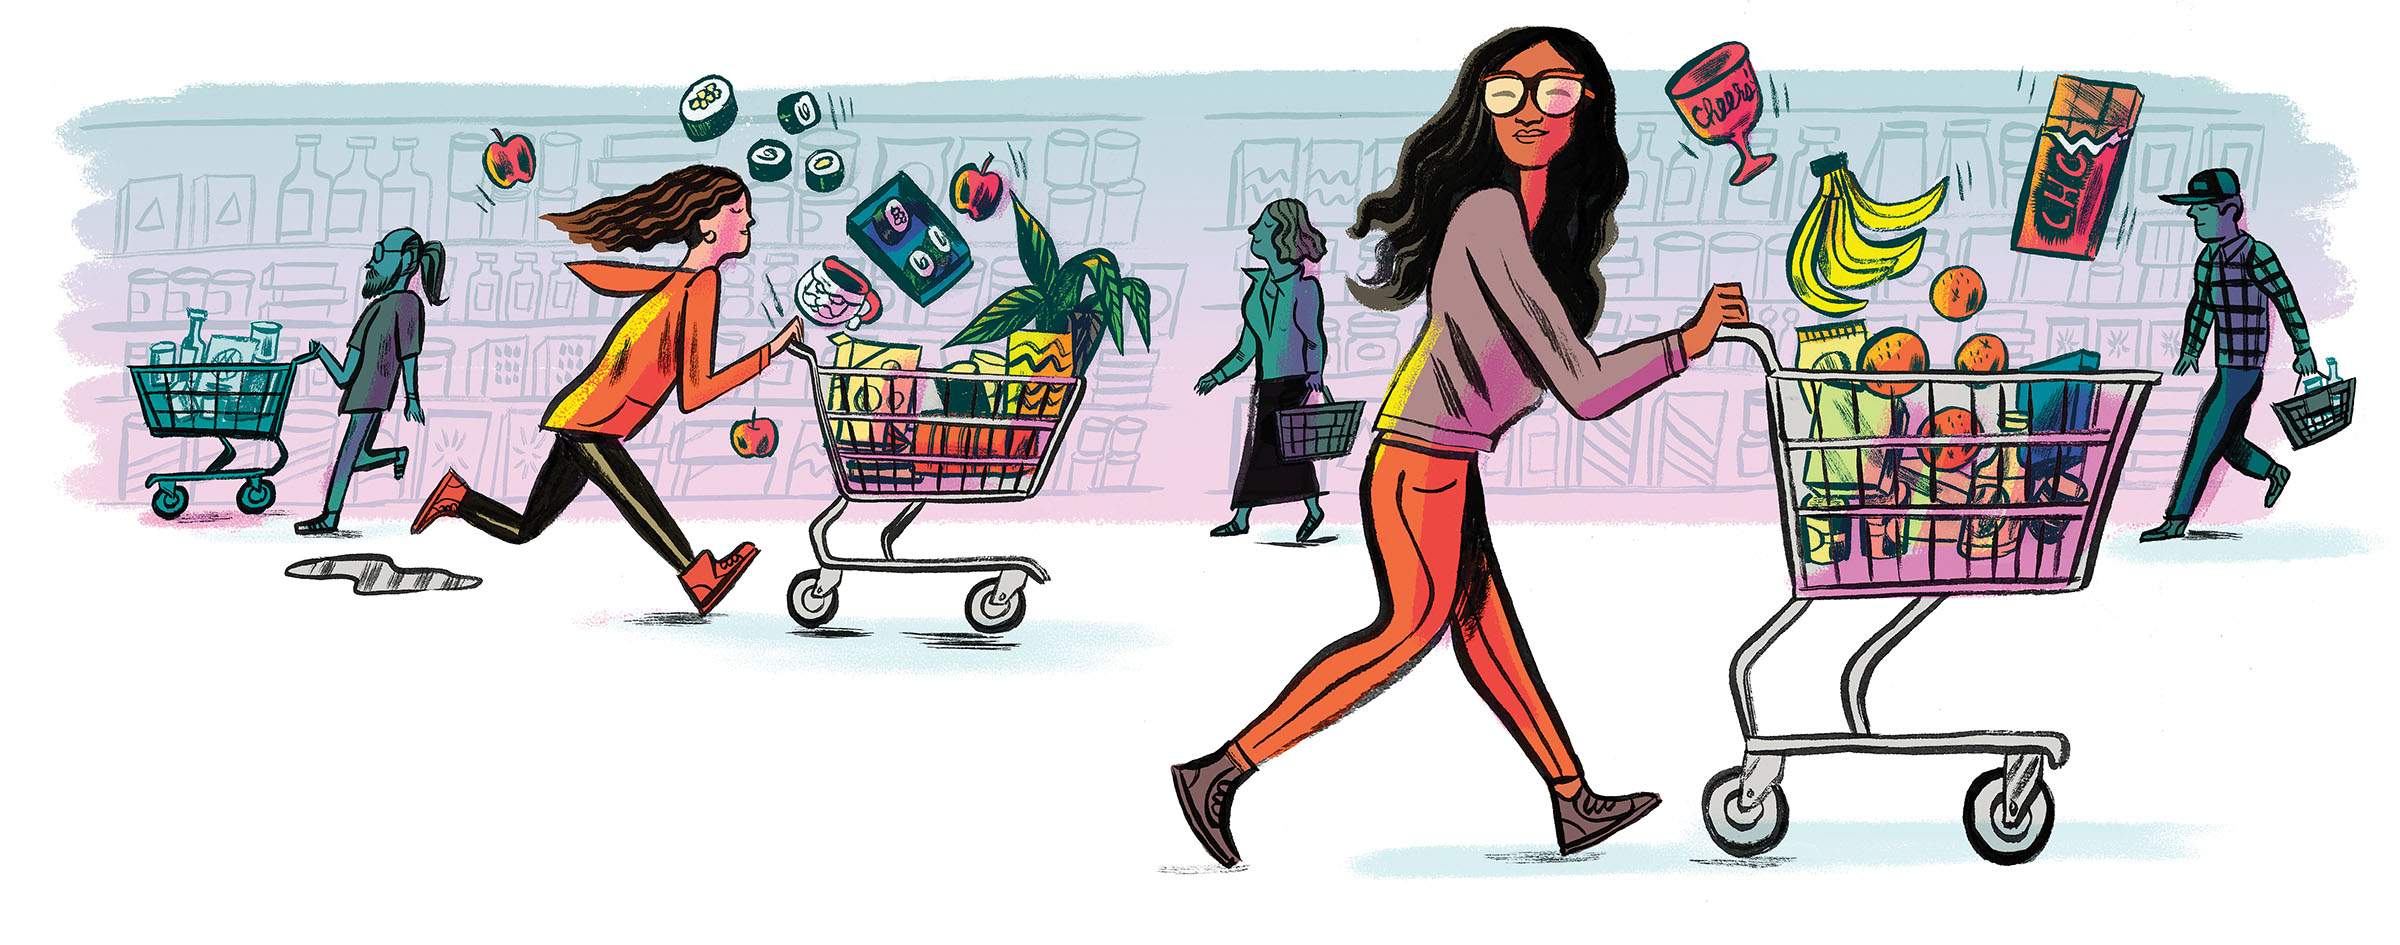 An illustration of a woman pushing a shopping cart through a grocery store